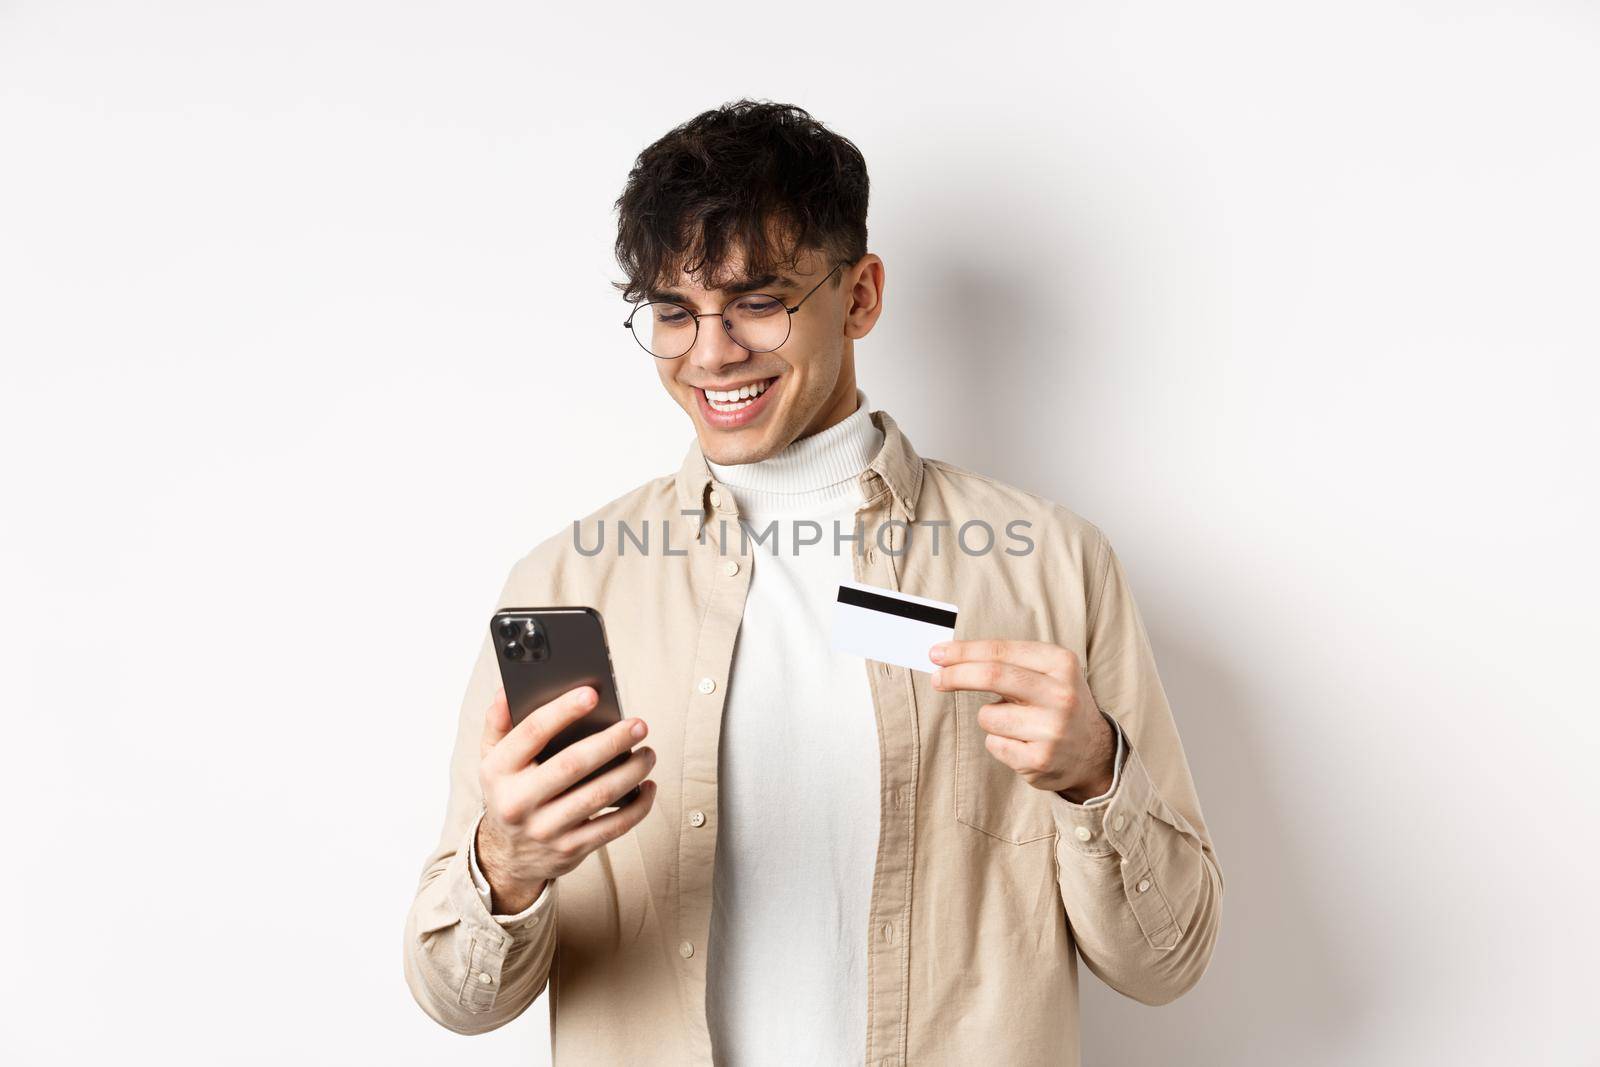 Online shopping. Happy young man using smartphone and plastic credit card, paying in internet, standing on white background.